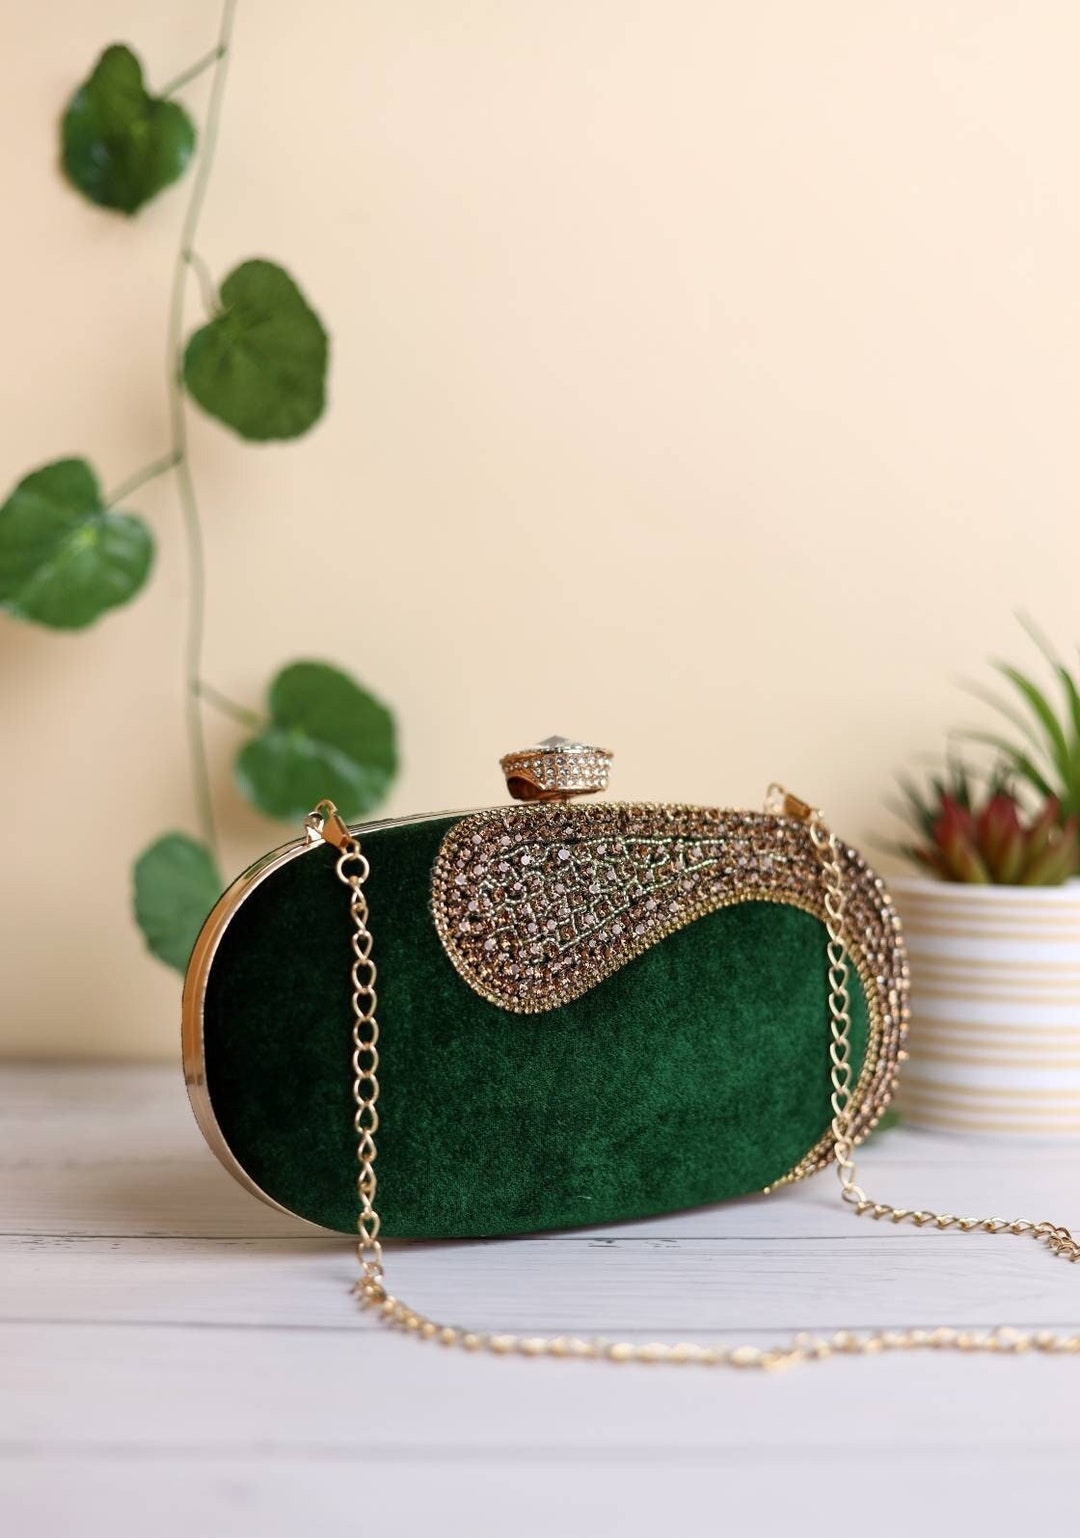 Sparkly Elegant Clutch Purse for Prom, Party, Wedding | Women's Bags |  Classy Women Collection